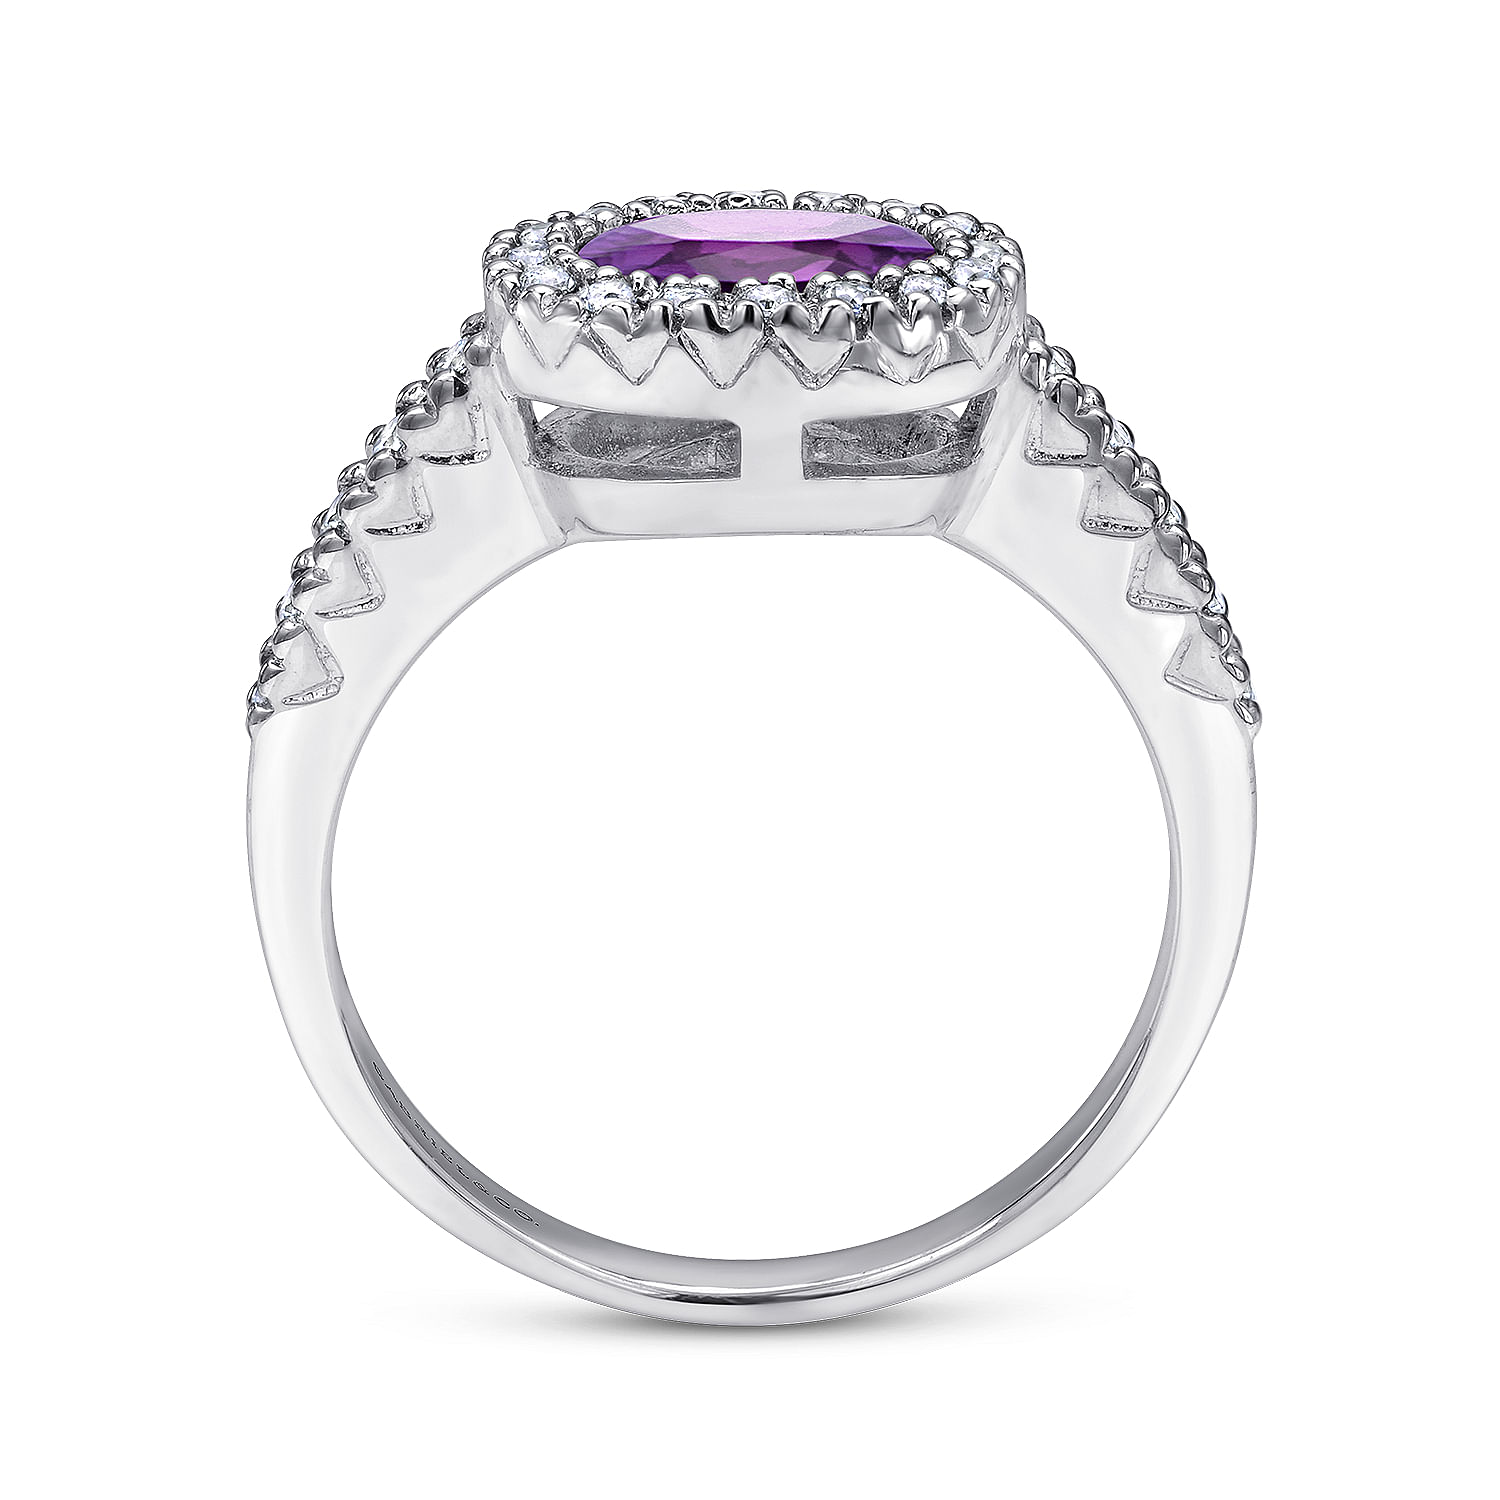 14K White Gold Oval Halo Amethyst and Diamond Ring